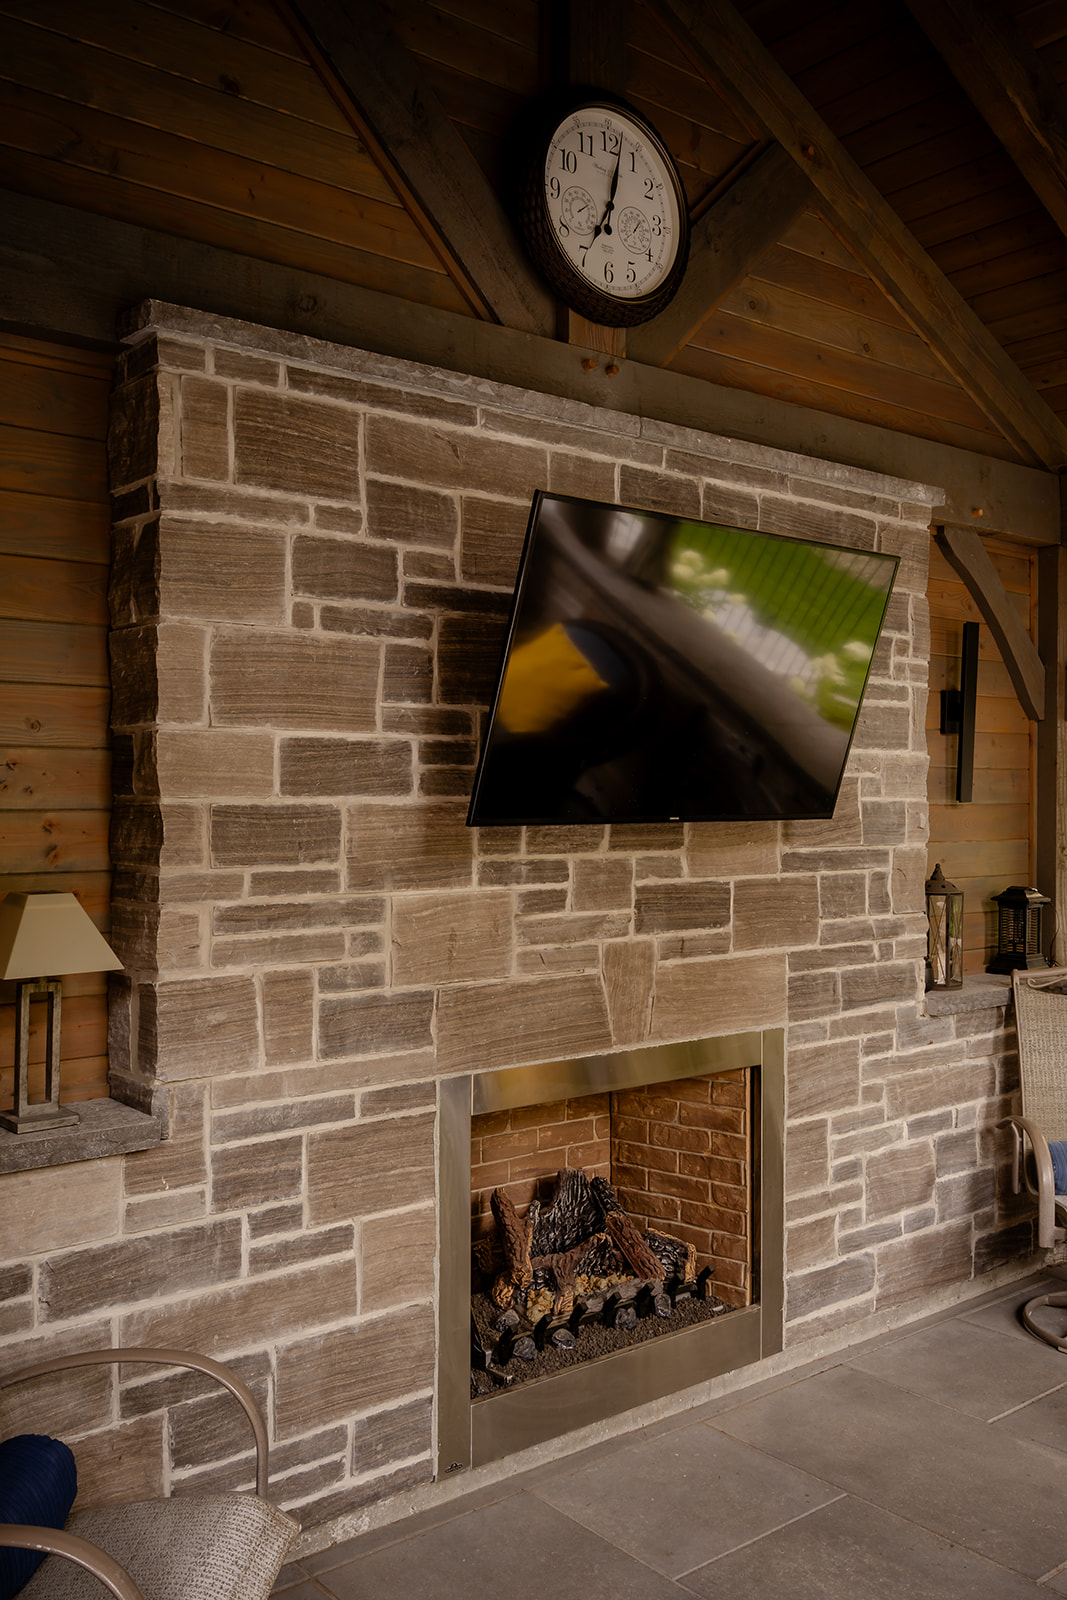 A TV mounted to the wall above a fireplace.